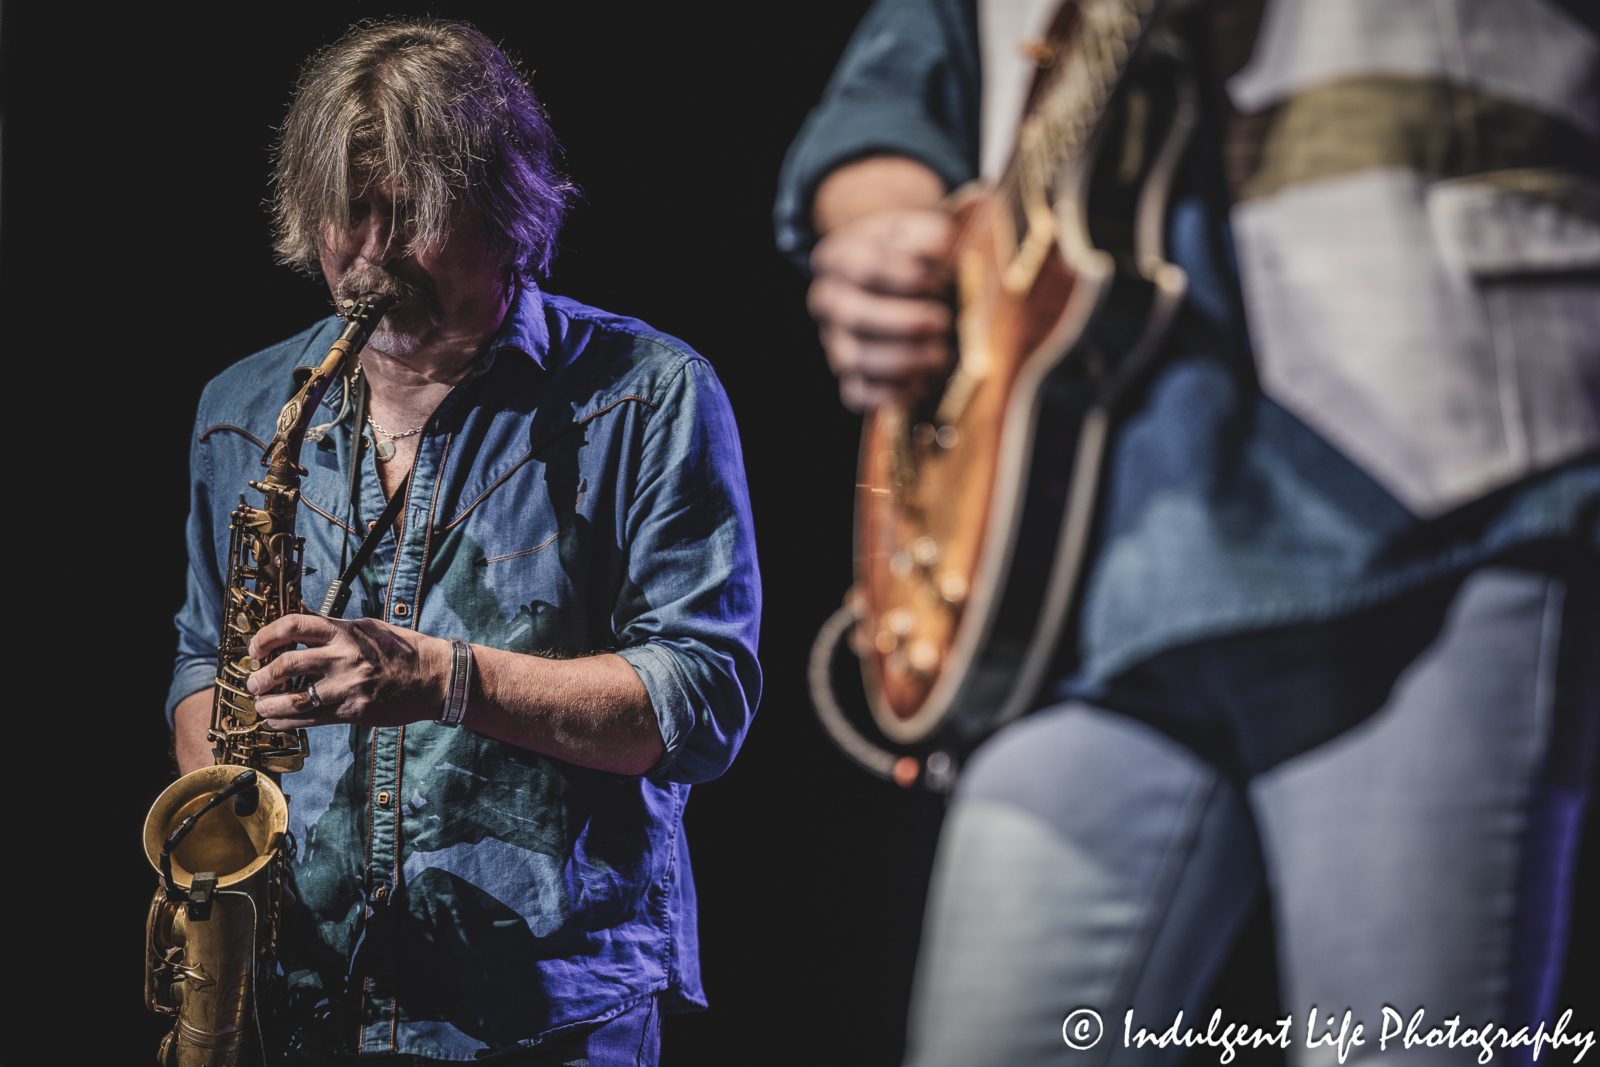 Multi-instrumentalist Marcus James Henderson of The Marshall Tucker Band playing the saxophone live at Star Pavilion inside of Ameristar Casino in Kansas City, MO on December 1, 2023.